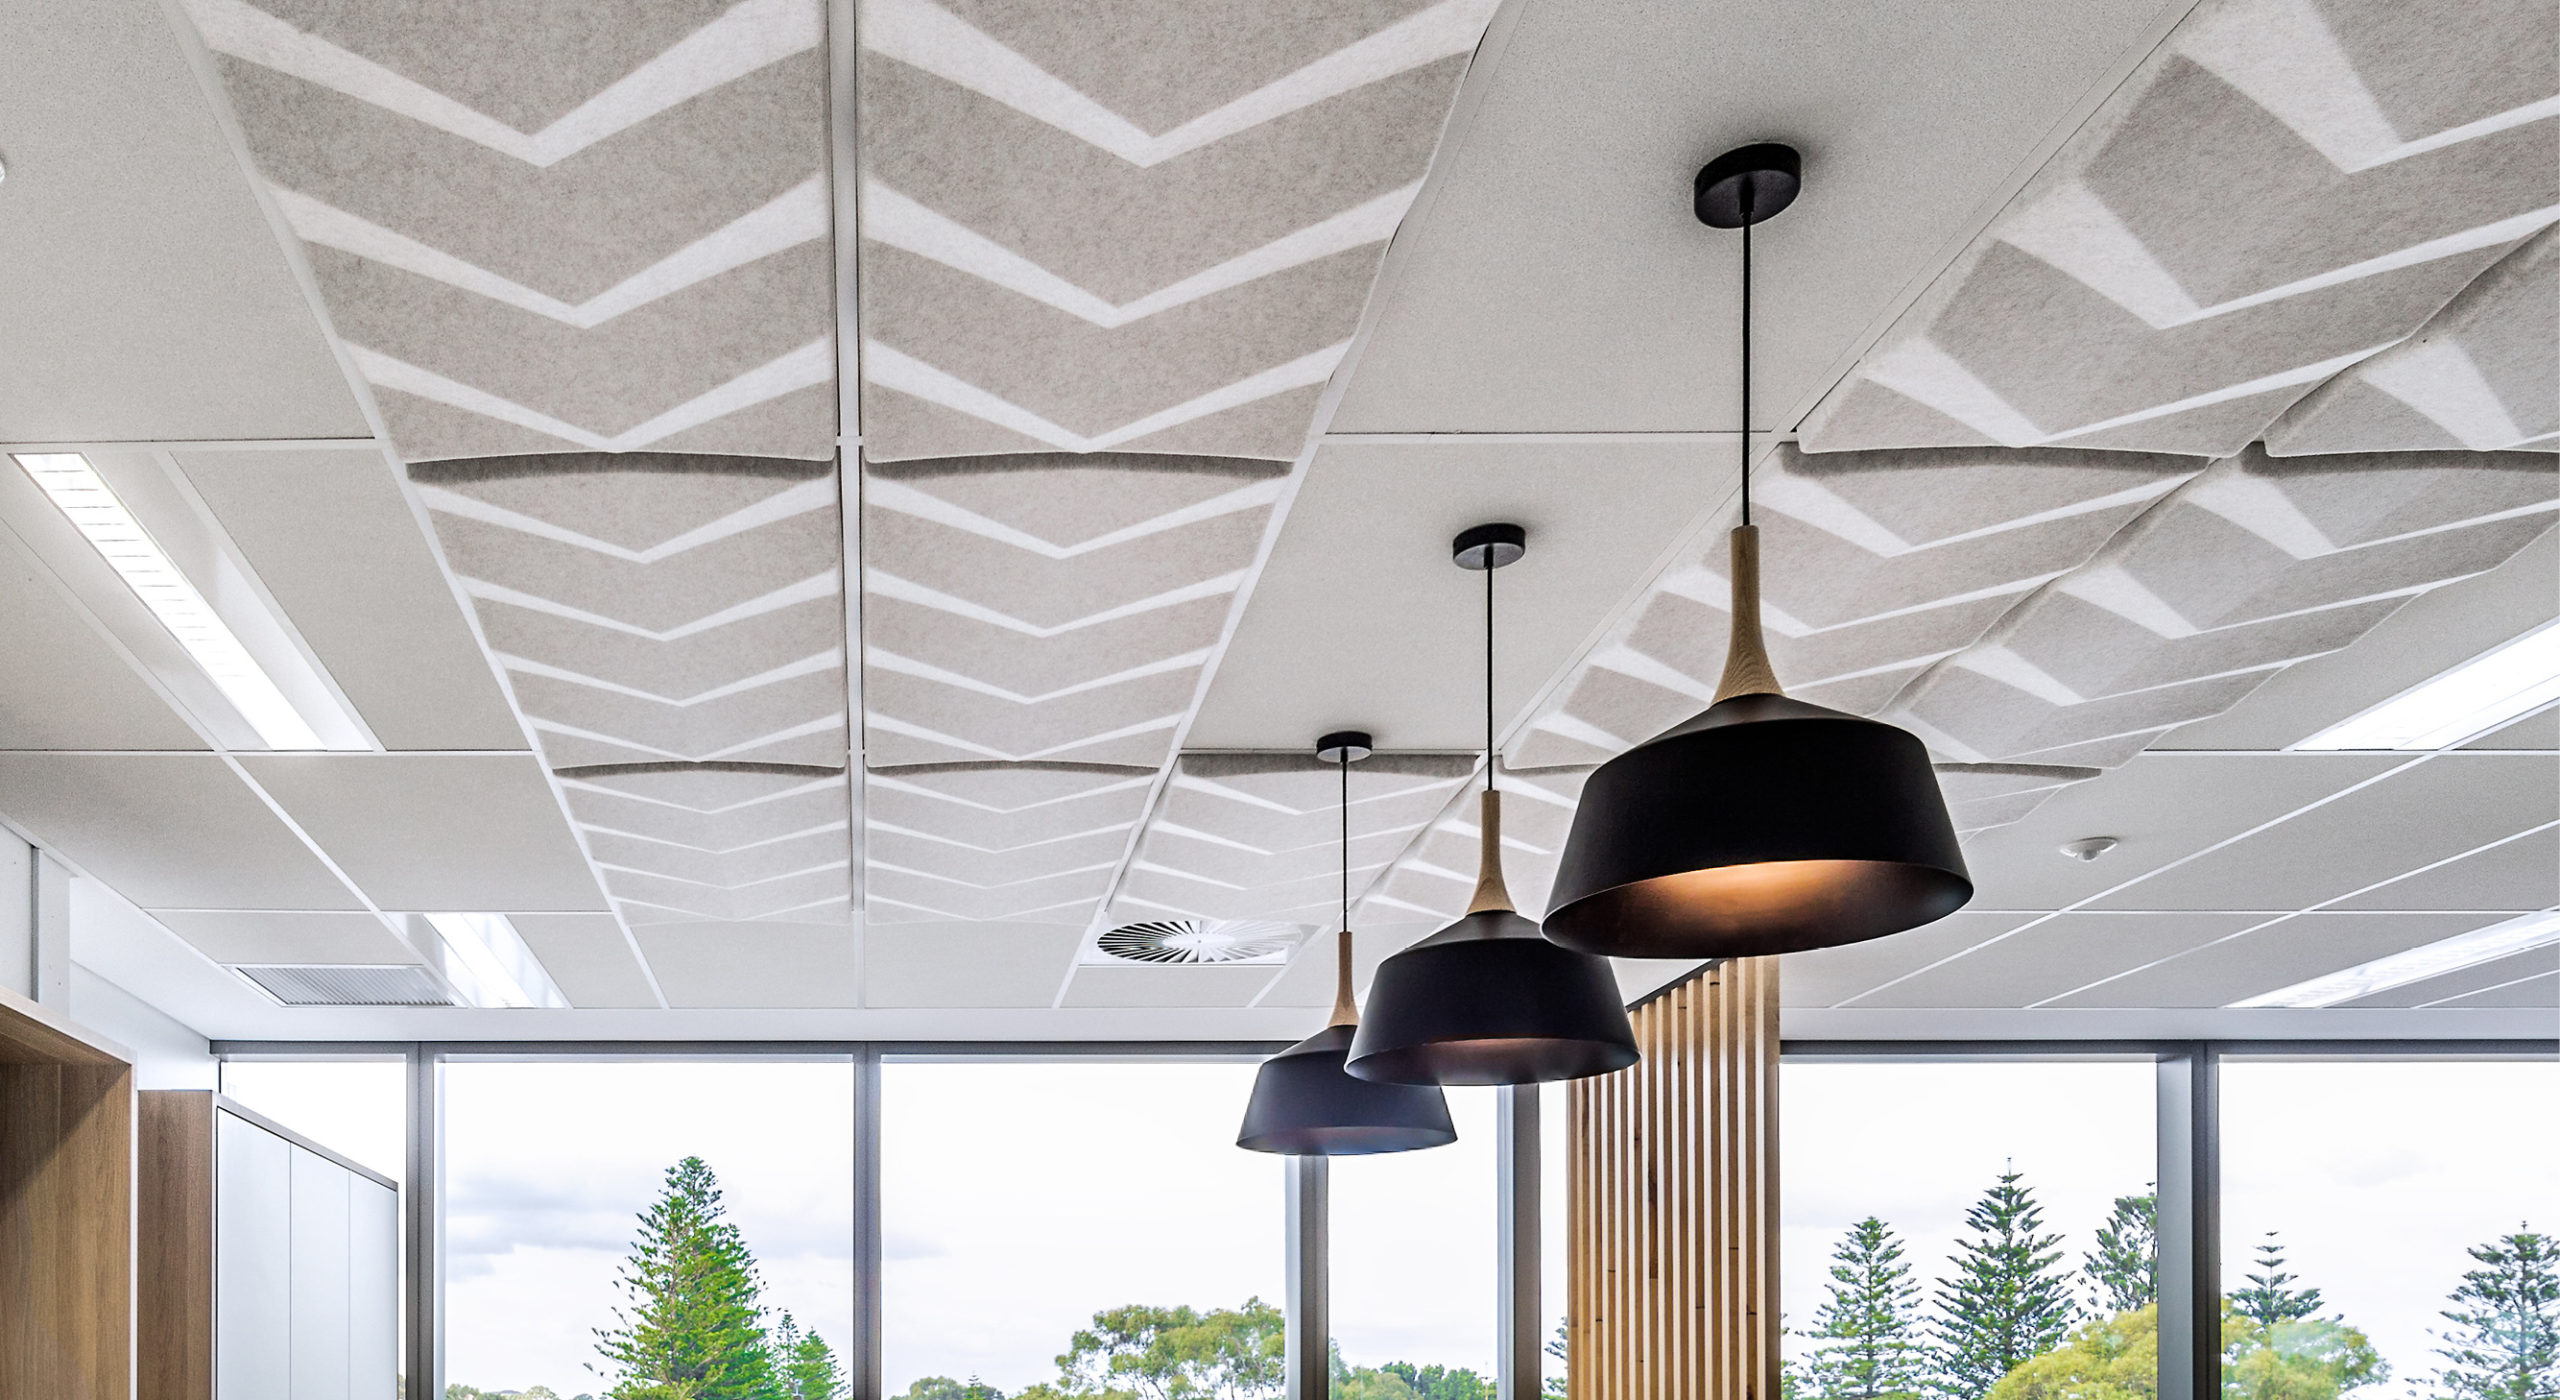 beige sound-absorbing ceiling tiles with drop lights and large window